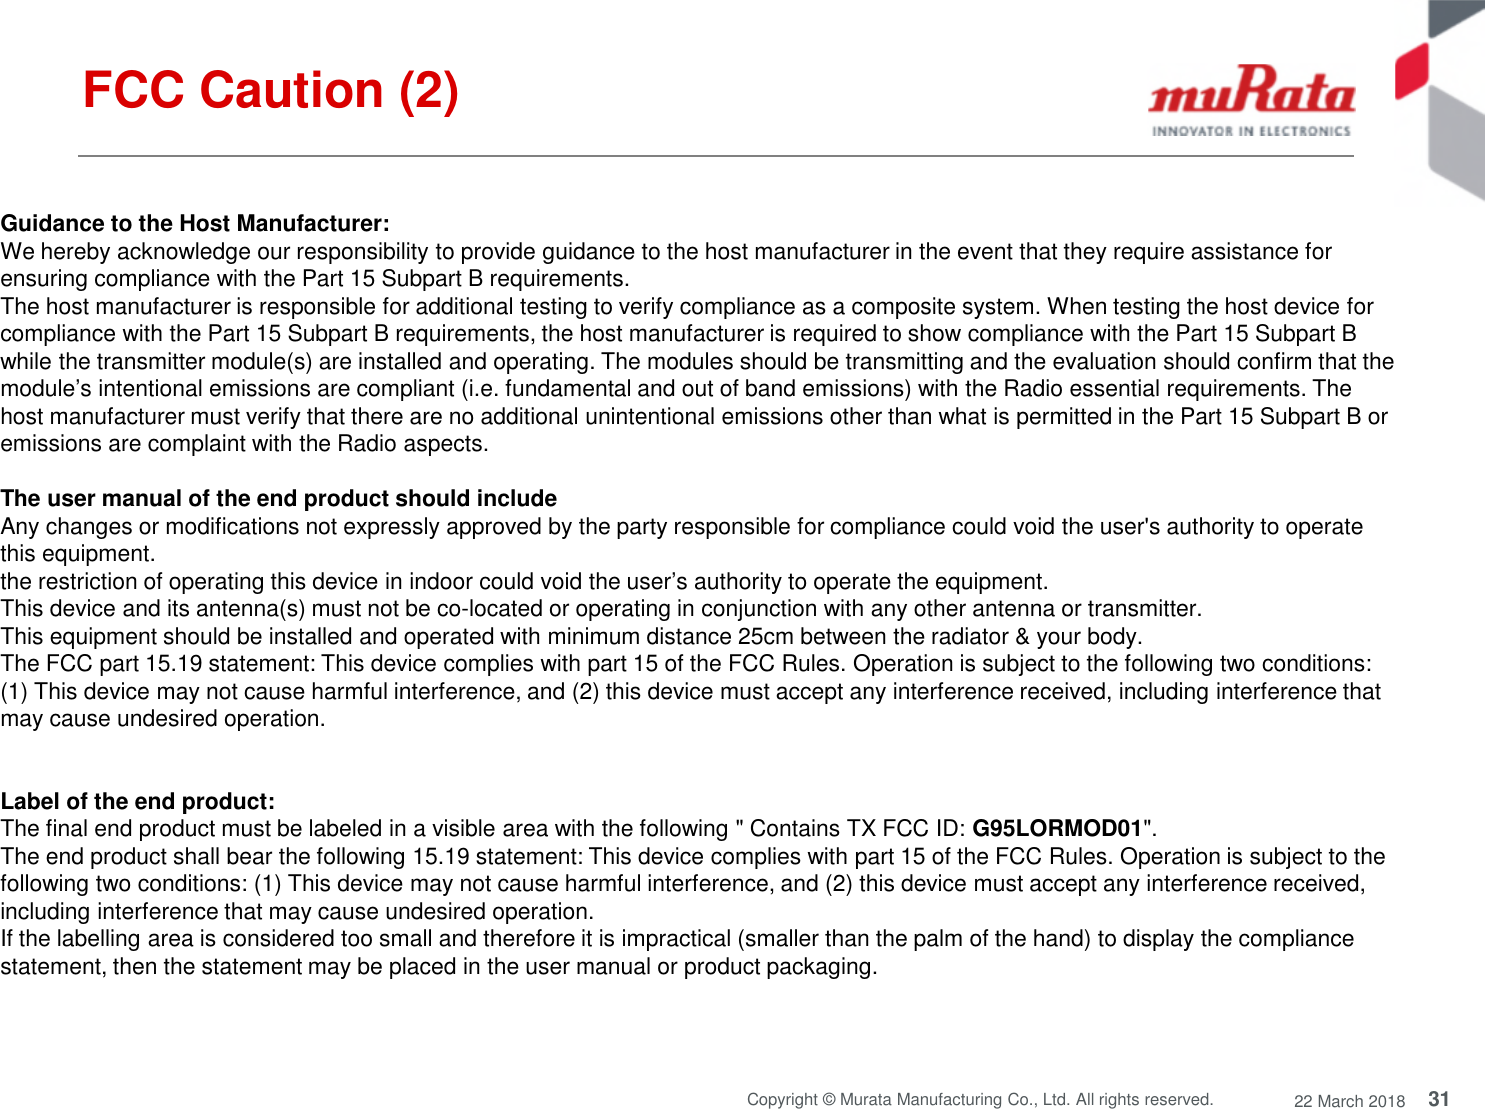 31Copyright © Murata Manufacturing Co., Ltd. All rights reserved. 22 March 2018Guidance to the Host Manufacturer:We hereby acknowledge our responsibility to provide guidance to the host manufacturer in the event that they require assistance forensuring compliance with the Part 15 Subpart B requirements.The host manufacturer is responsible for additional testing to verify compliance as a composite system. When testing the host device forcompliance with the Part 15 Subpart B requirements, the host manufacturer is required to show compliance with the Part 15 Subpart Bwhile the transmitter module(s) are installed and operating. The modules should be transmitting and the evaluation should confirm that themodule’s intentional emissions are compliant (i.e. fundamental and out of band emissions) with the Radio essential requirements. Thehost manufacturer must verify that there are no additional unintentional emissions other than what is permitted in the Part 15 Subpart B oremissions are complaint with the Radio aspects.The user manual of the end product should includeAny changes or modifications not expressly approved by the party responsible for compliance could void the user&apos;s authority to operatethis equipment.the restriction of operating this device in indoor could void the user’s authority to operate the equipment.This device and its antenna(s) must not be co-located or operating in conjunction with any other antenna or transmitter.This equipment should be installed and operated with minimum distance 25cm between the radiator &amp; your body.The FCC part 15.19 statement: This device complies with part 15 of the FCC Rules. Operation is subject to the following two conditions:(1) This device may not cause harmful interference, and (2) this device must accept any interference received, including interference thatmay cause undesired operation.Label of the end product:The final end product must be labeled in a visible area with the following &quot; Contains TX FCC ID: G95LORMOD01&quot;.The end product shall bear the following 15.19 statement: This device complies with part 15 of the FCC Rules. Operation is subject to thefollowing two conditions: (1) This device may not cause harmful interference, and (2) this device must accept any interference received,including interference that may cause undesired operation.If the labelling area is considered too small and therefore it is impractical (smaller than the palm of the hand) to display the compliancestatement, then the statement may be placed in the user manual or product packaging.FCC Caution (2)